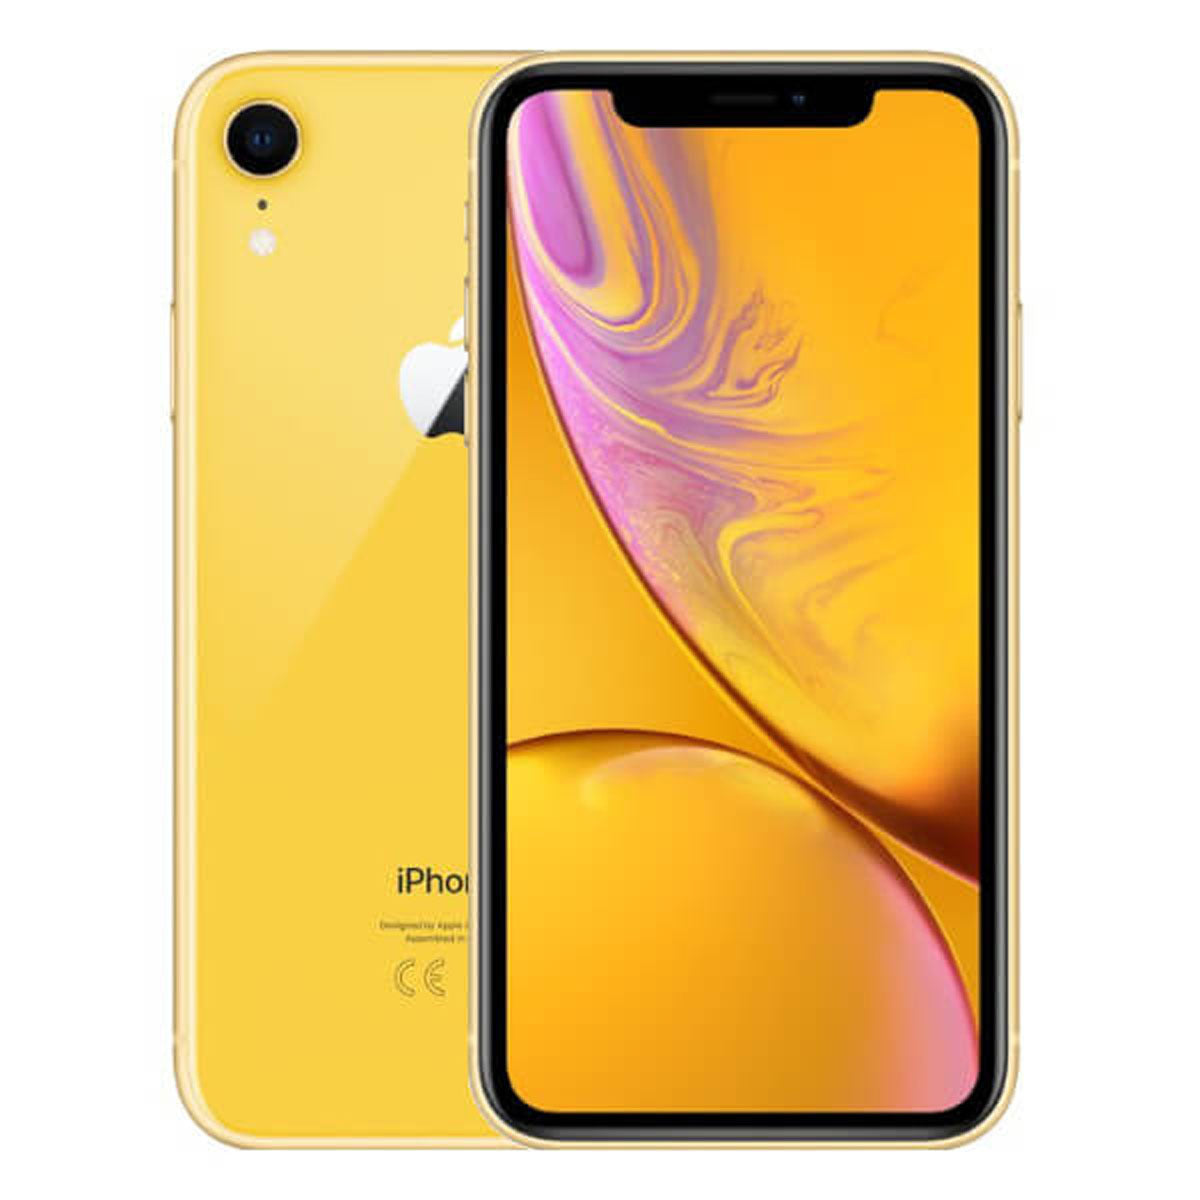 Certified Pre-Owned iPhone XR - Factory Unlocked: Your Gateway to Seamless Connectivity!